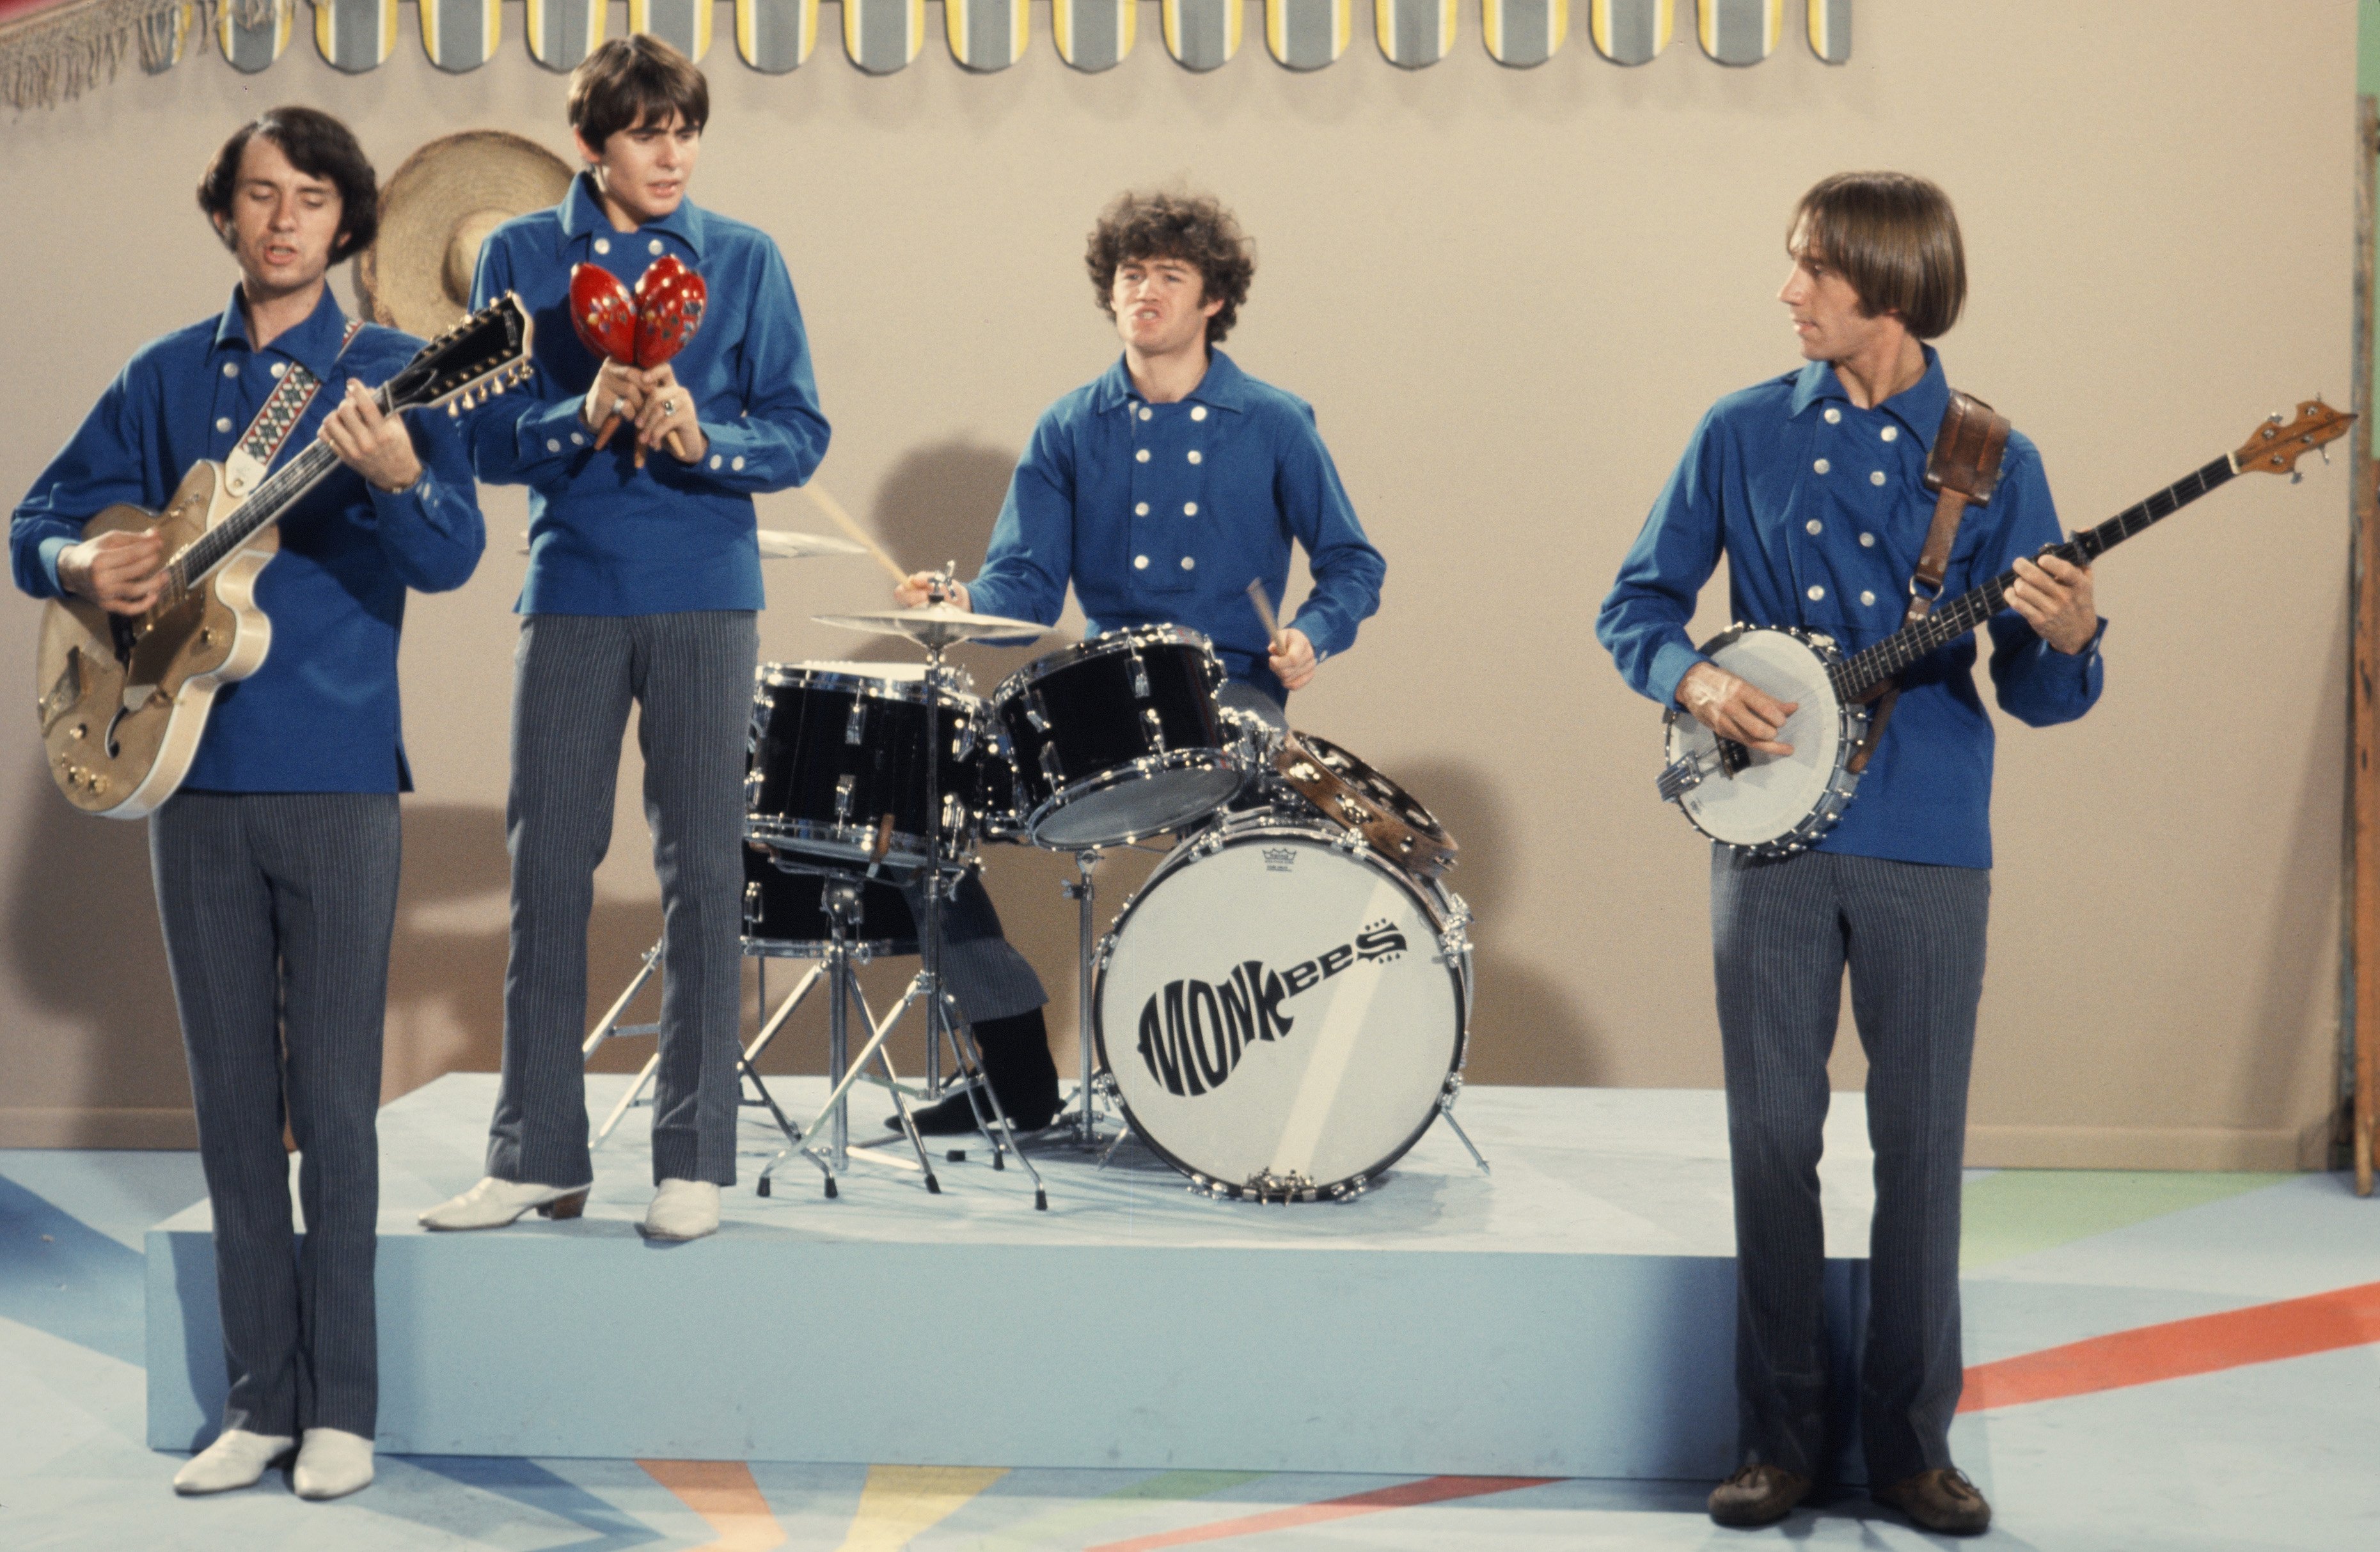 The Monkees’ Mike Nesmith, Davy Jones, Micky Dolenz, and Peter Tork playing songs